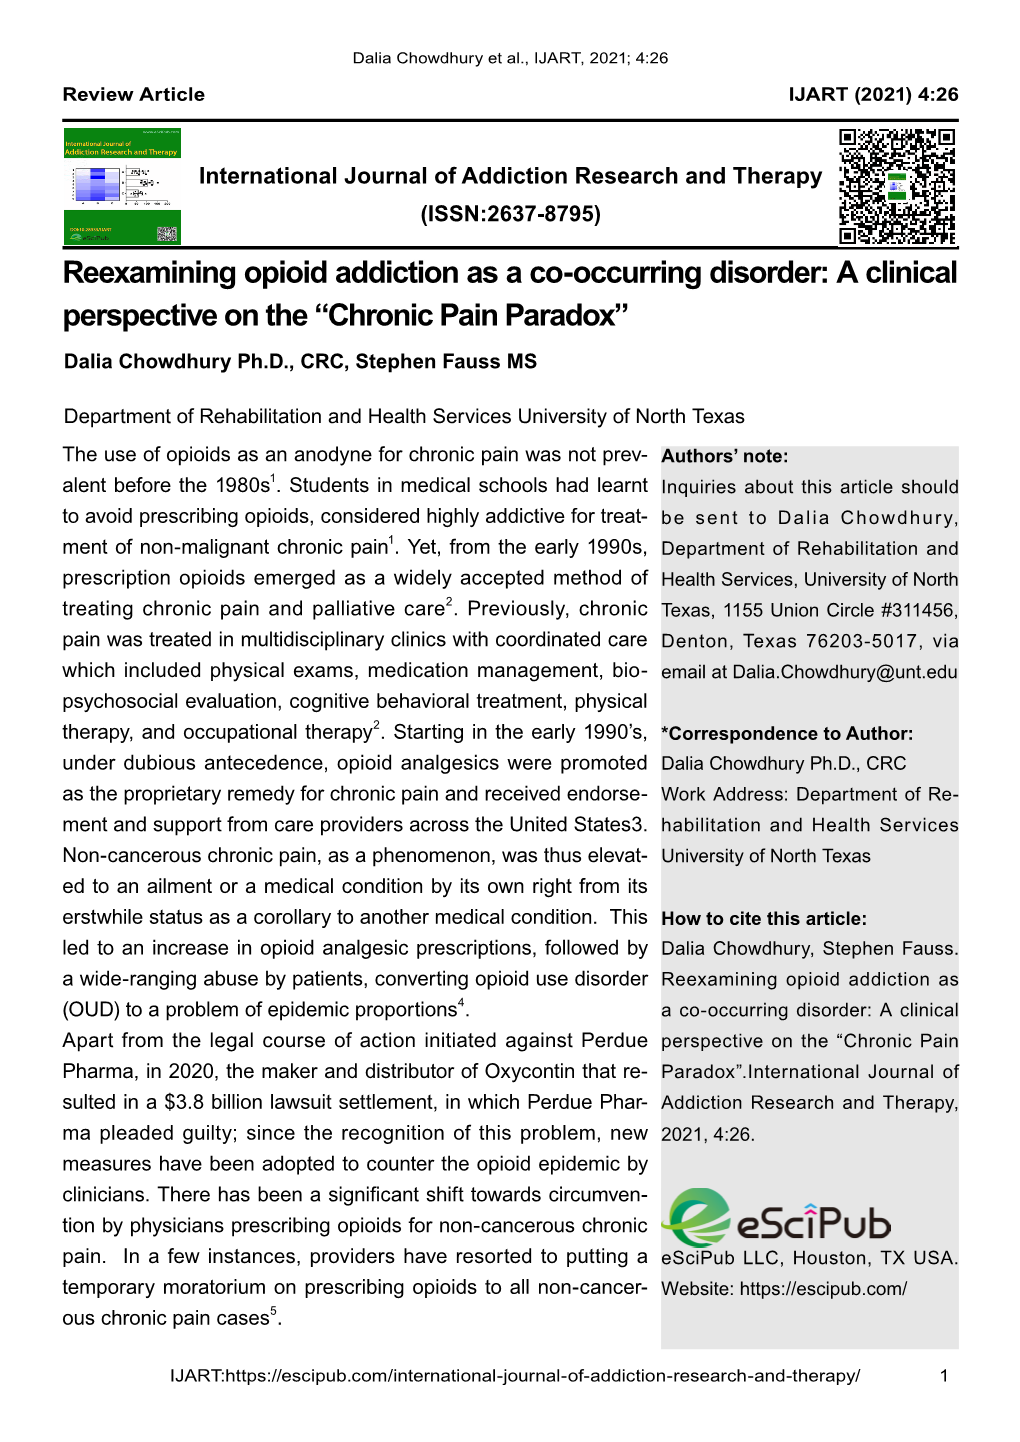 Reexamining Opioid Addiction As a Co-Occurring Disorder: a Clinical Perspective on the “Chronic Pain Paradox” Dalia Chowdhury Ph.D., CRC, Stephen Fauss MS